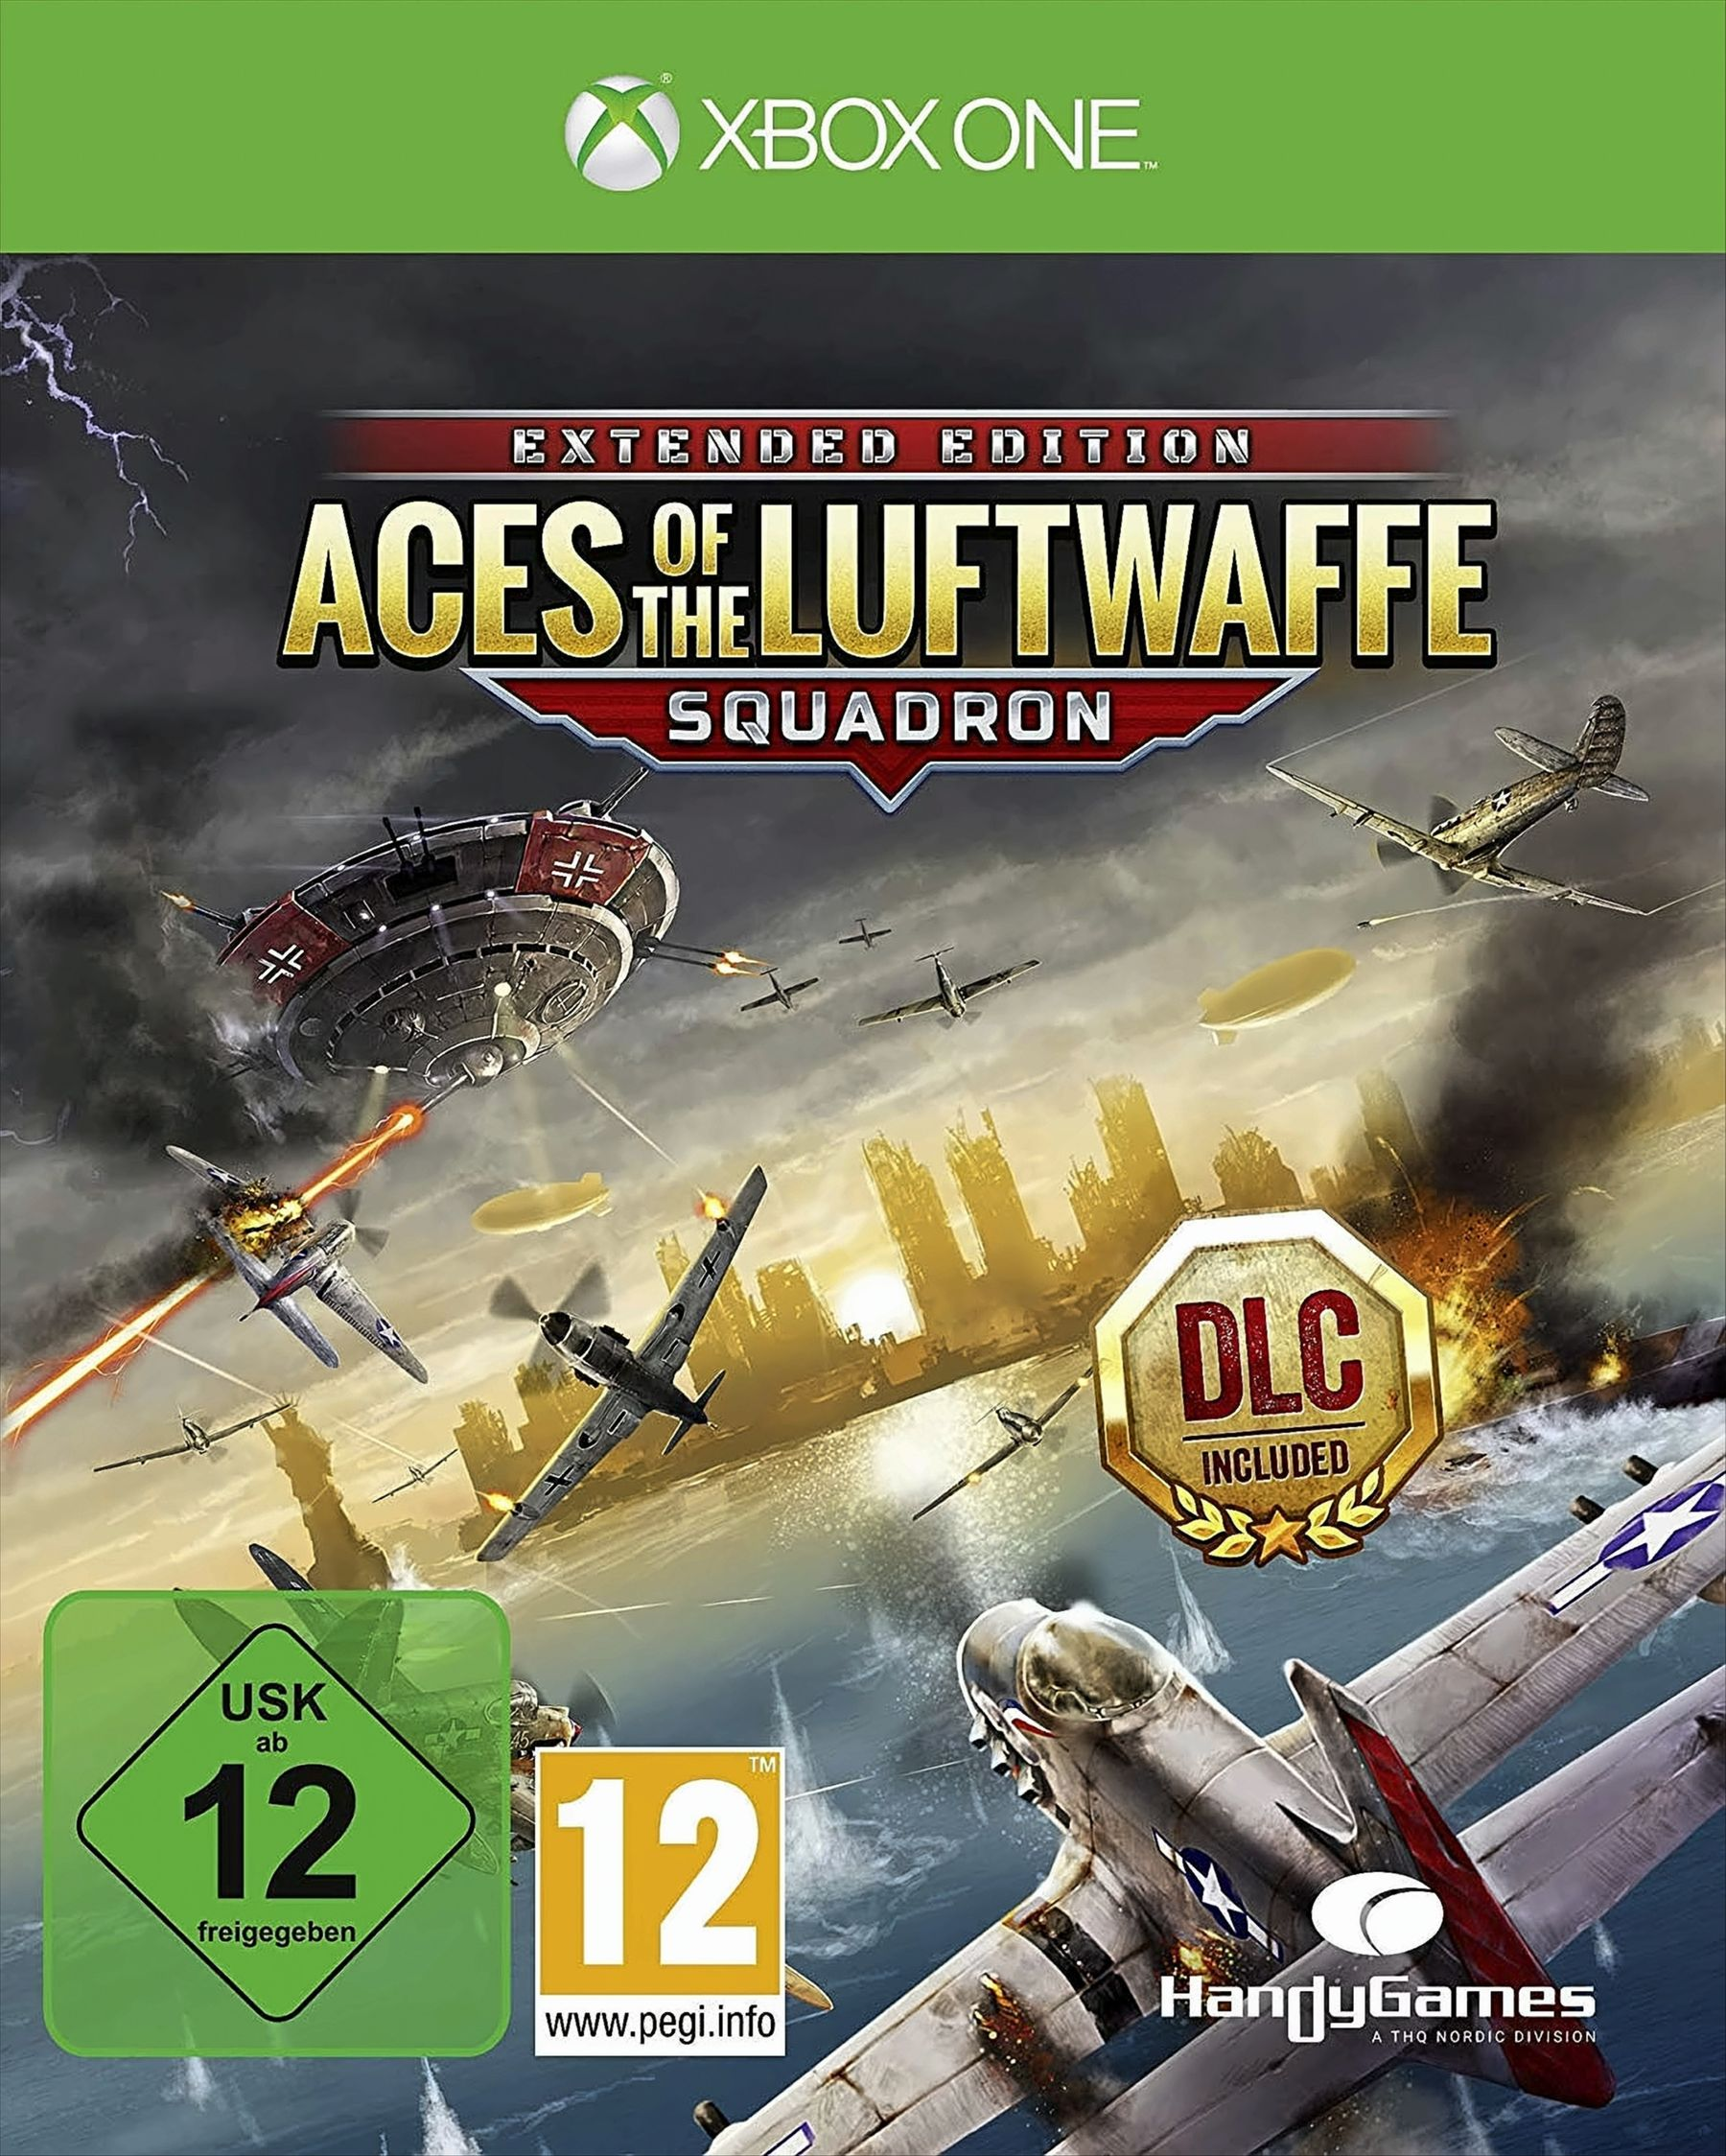 Luftwaffe Squadron [Xbox One] - Aces of the Edition -